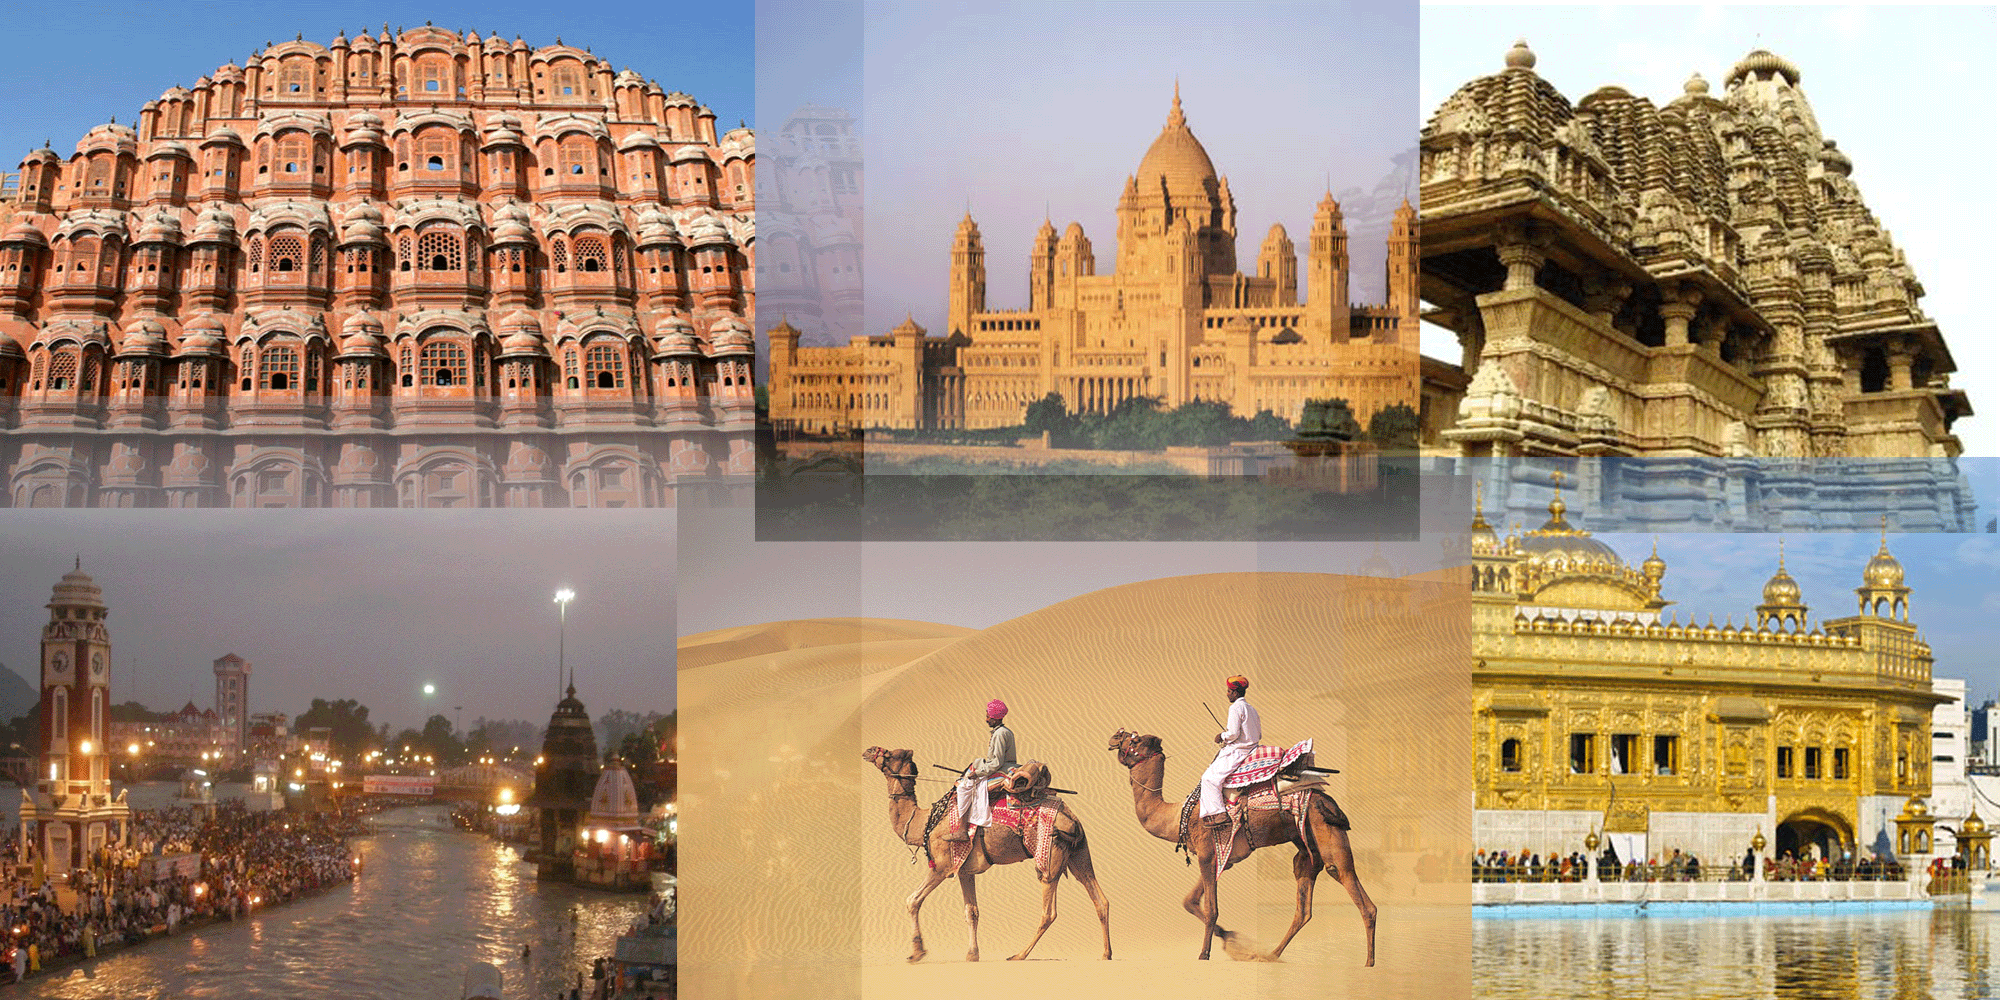 tour north india packages